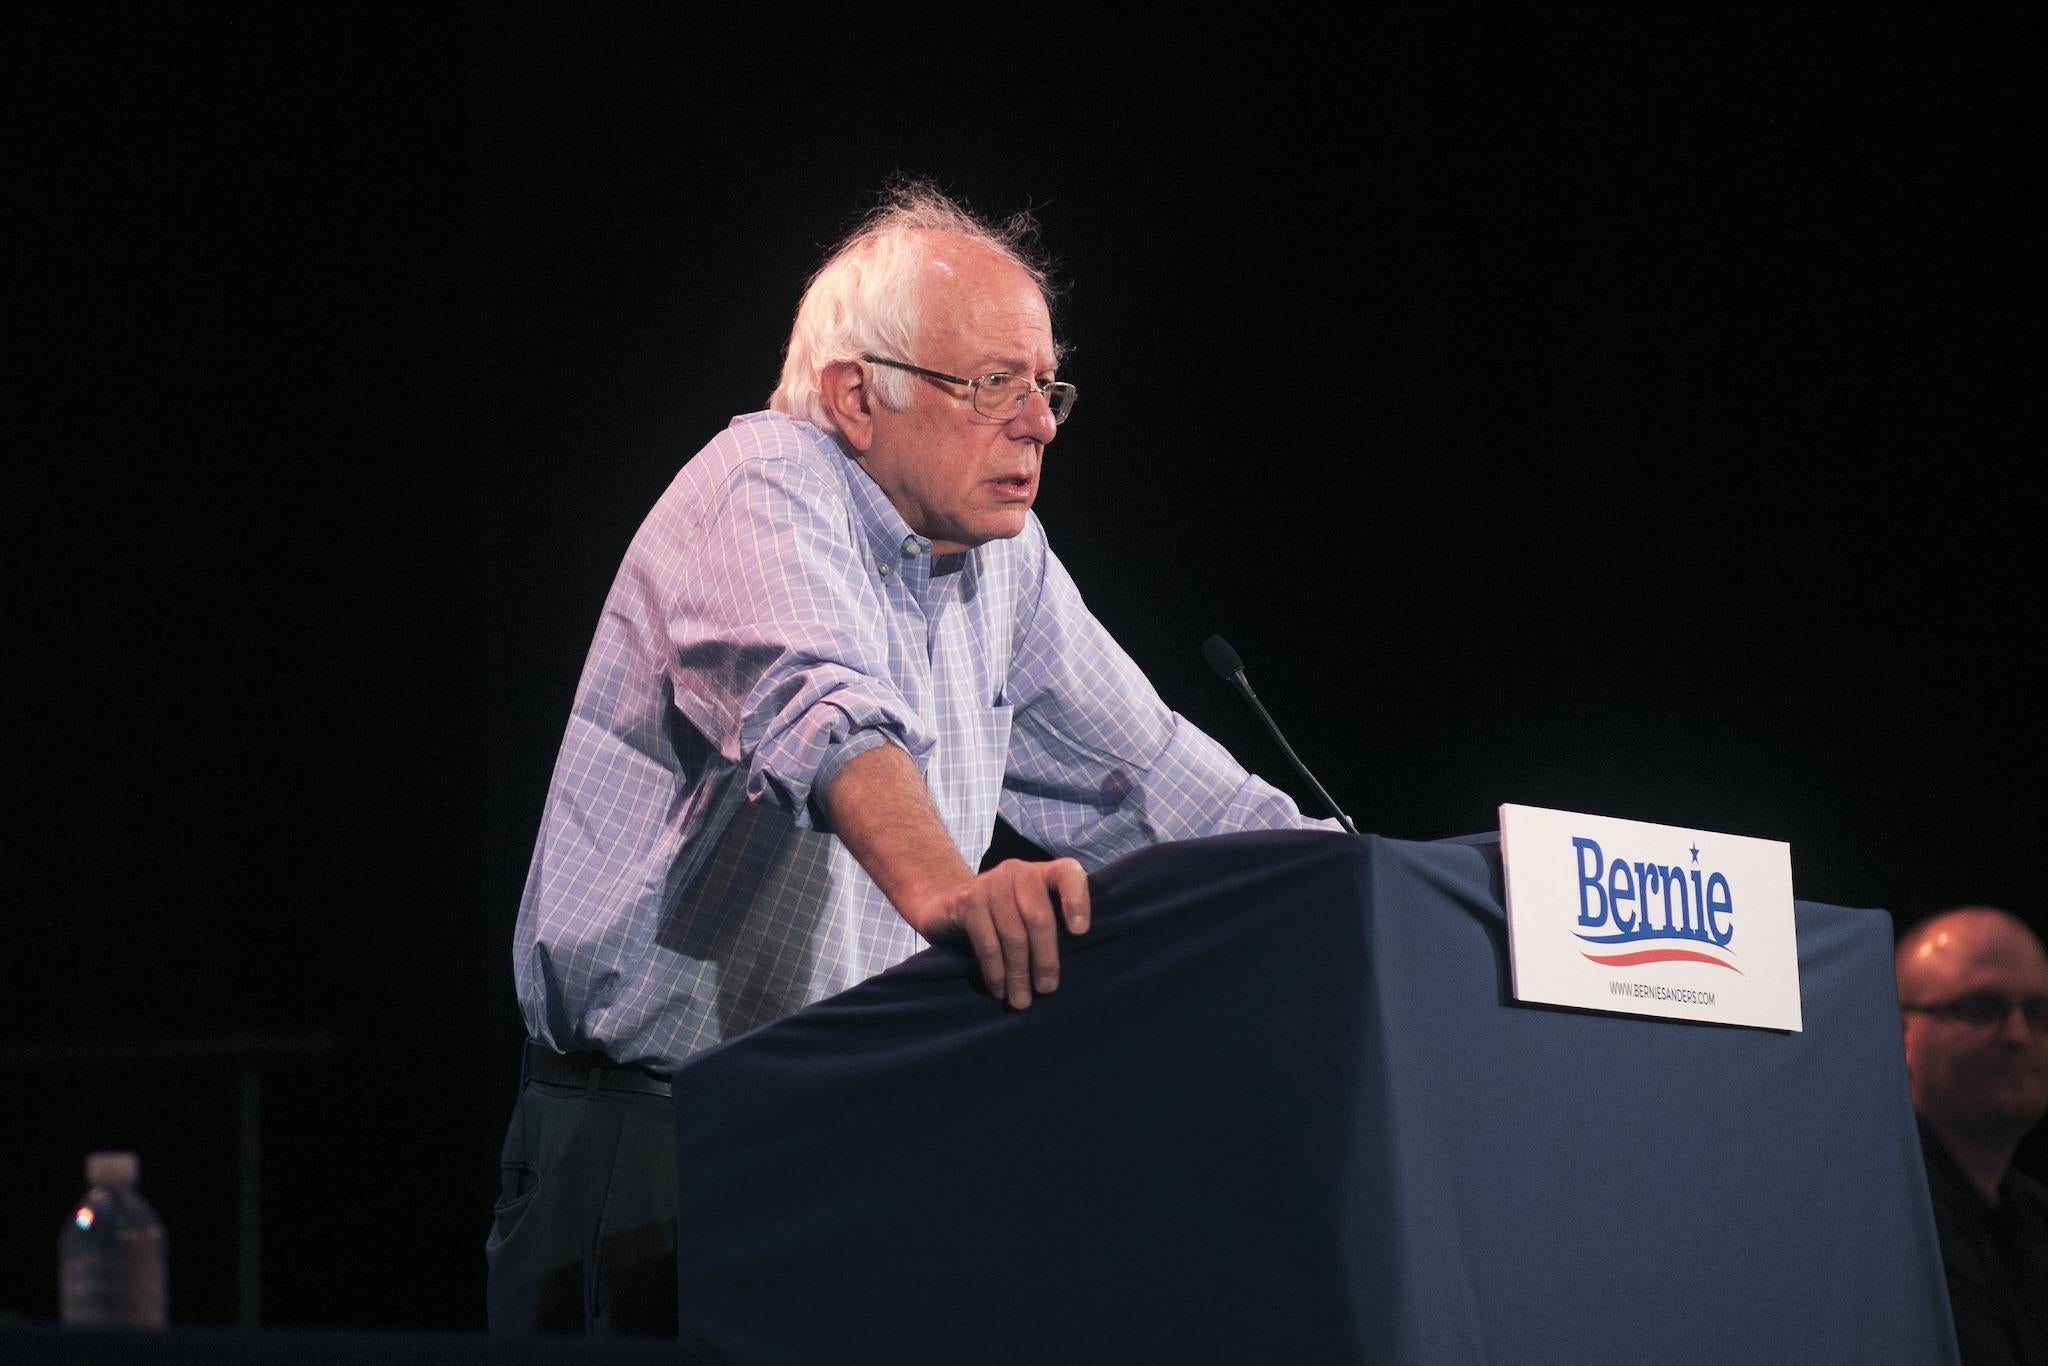 Bernie Sanders holds a rally on jobs, healthcare, and the economy at Shawnee State University on August 22, 2017